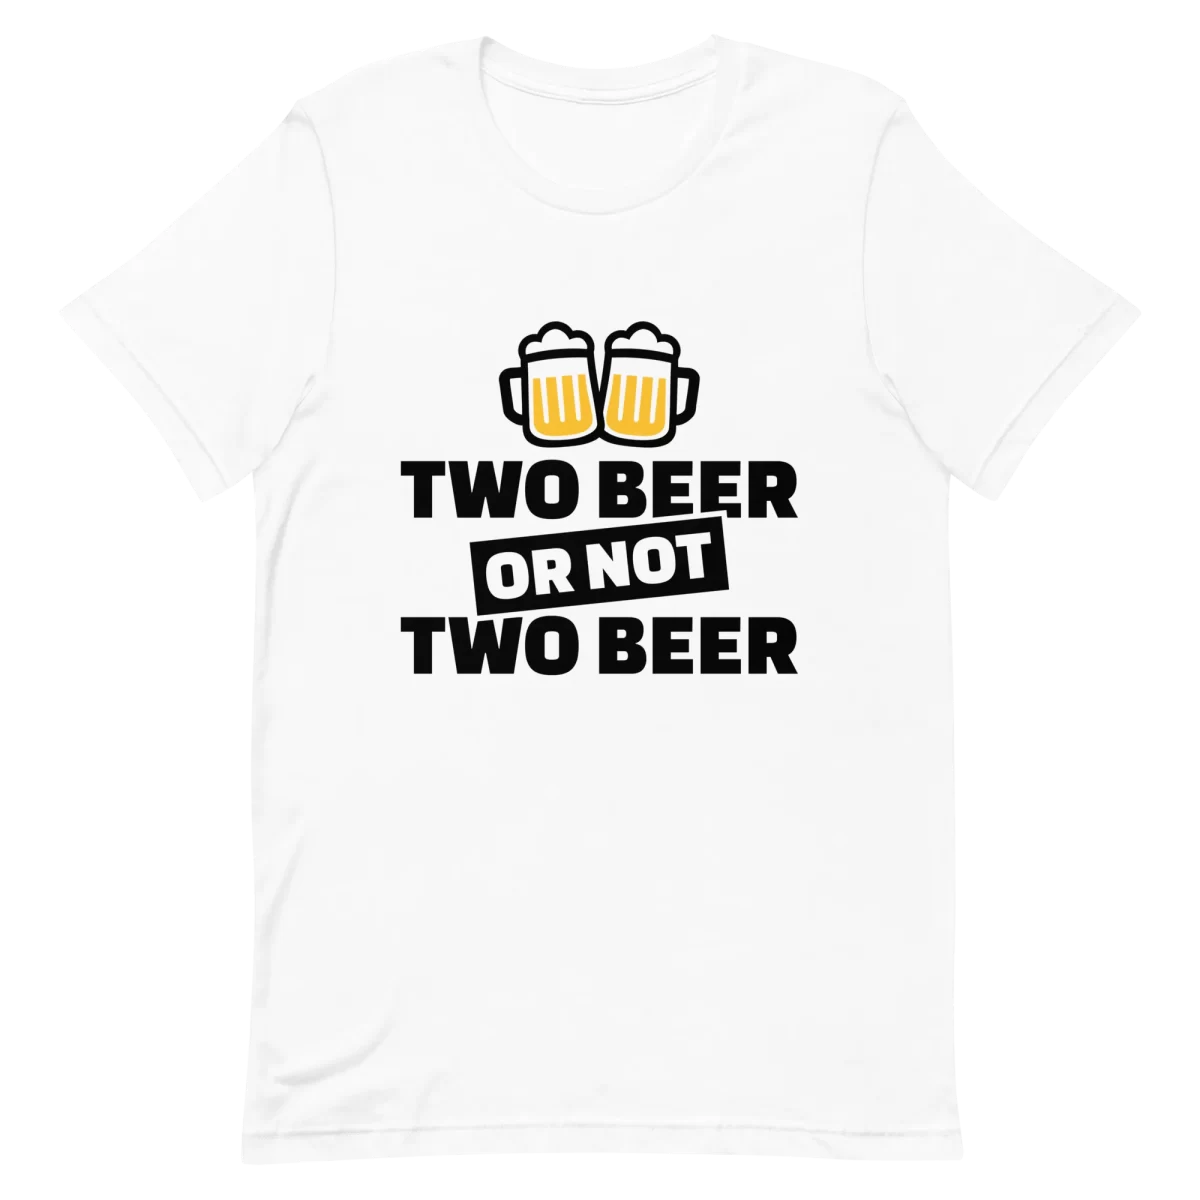 Unisex T-Shirt - Two Beer or Not to Beer - White